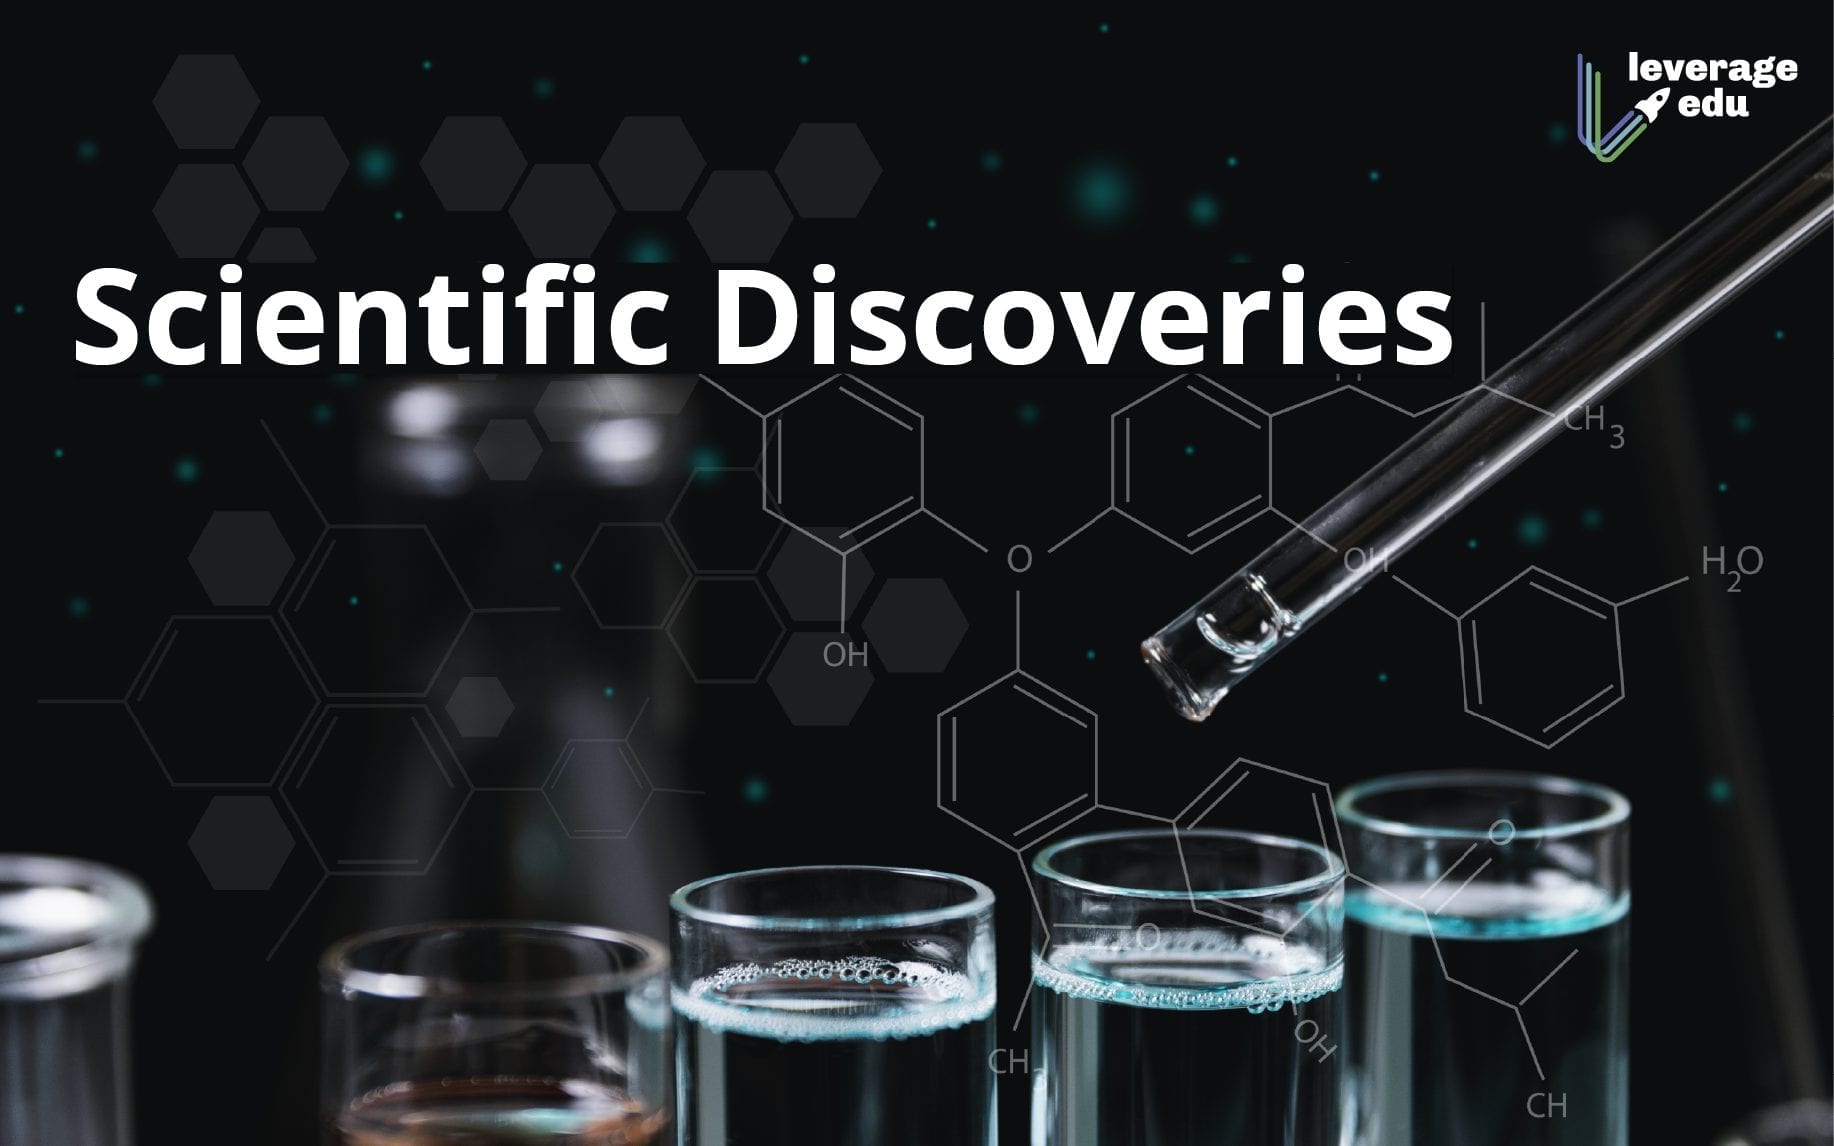 The Best Scientific Discoveries of the Year! Leverage Edu